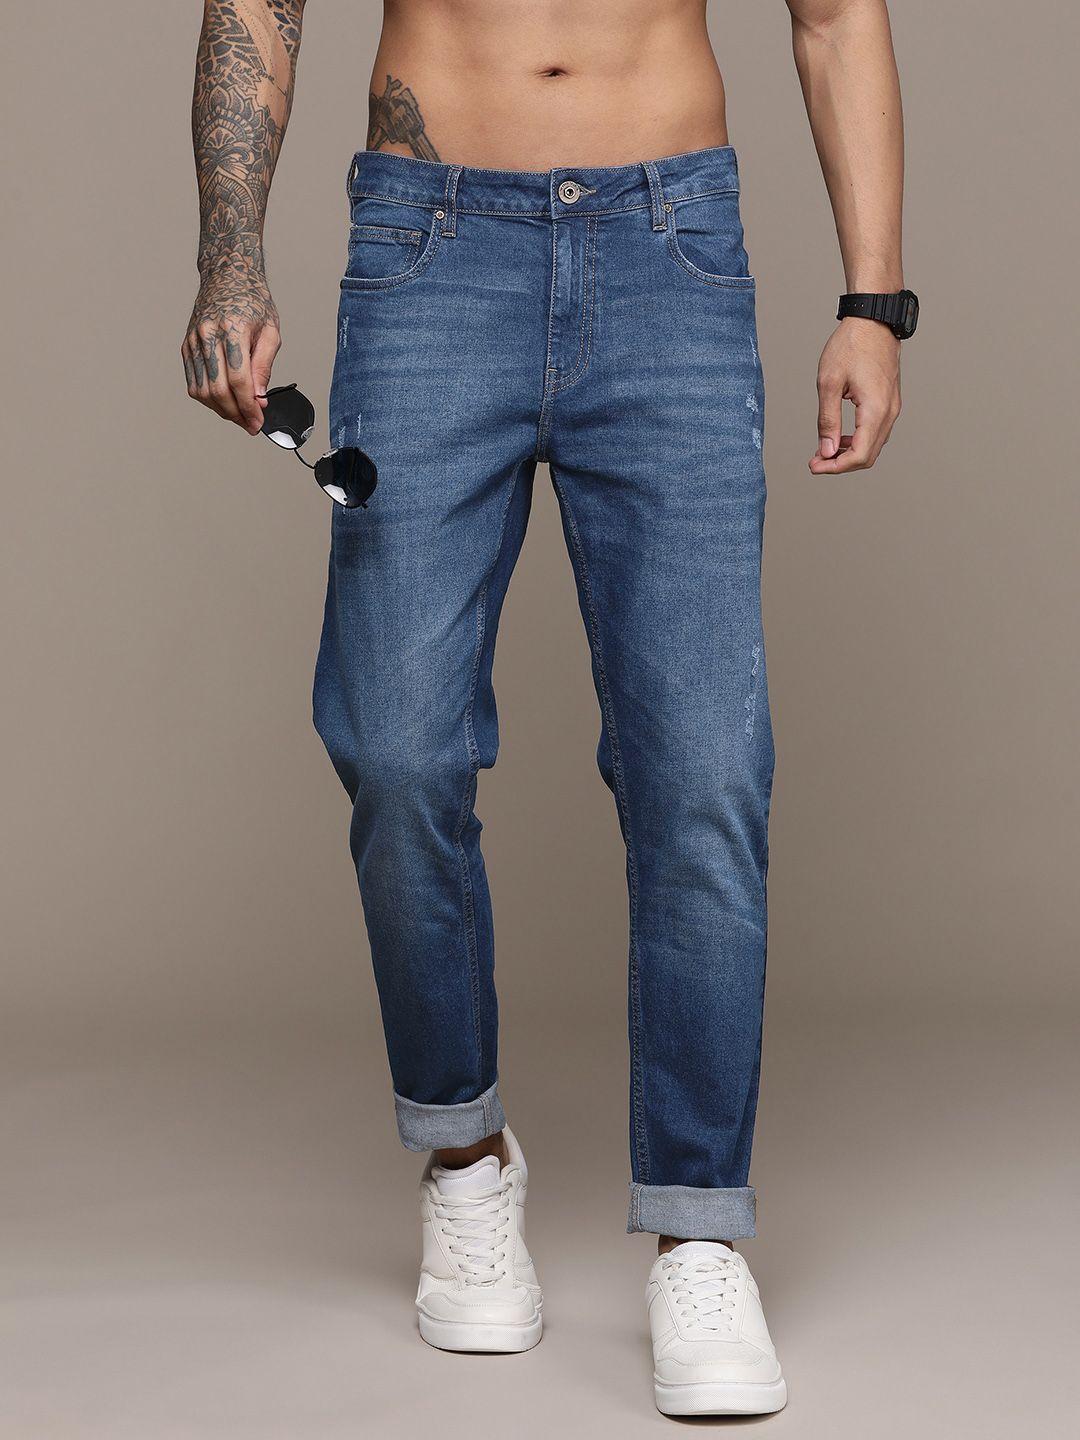 The Roadster Lifestyle Co. Men Slim Tapered Fit Jeans